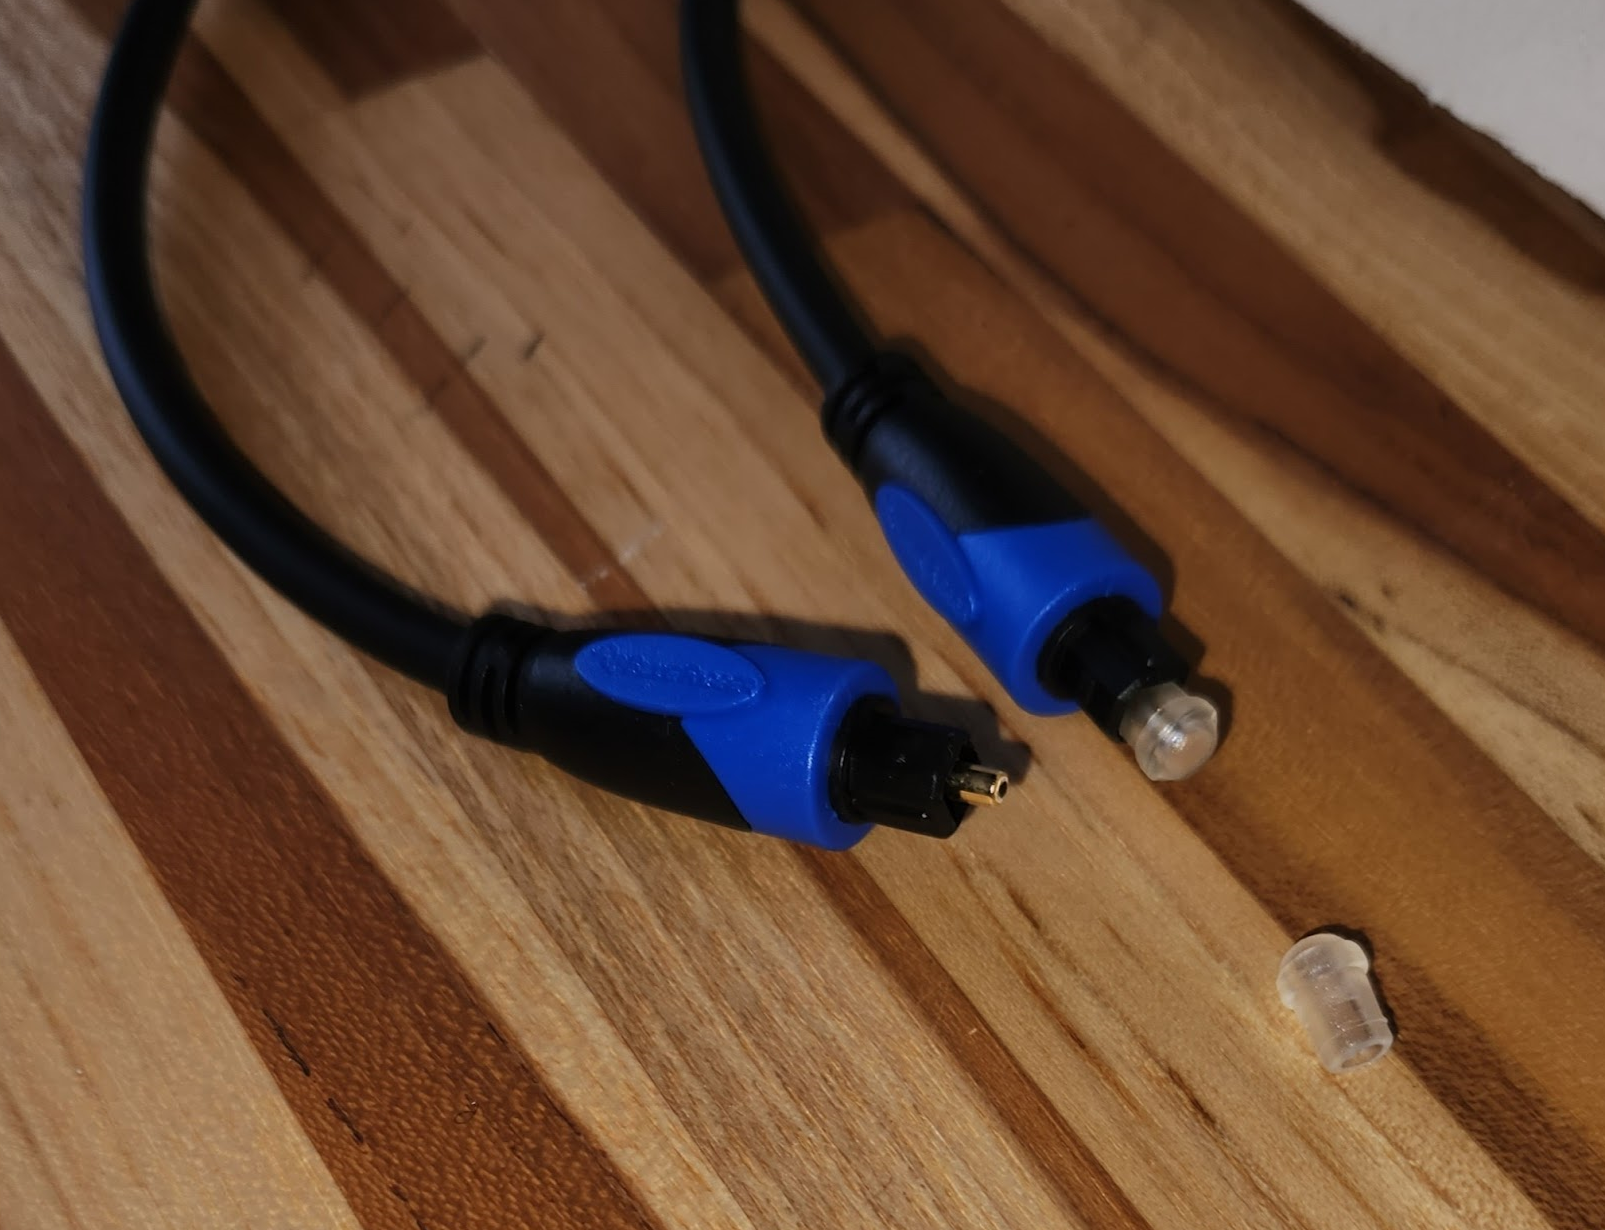 Toslink / SPDIF / ADAT cable<br>One end has a cap on; the other cap is shown in the foreground